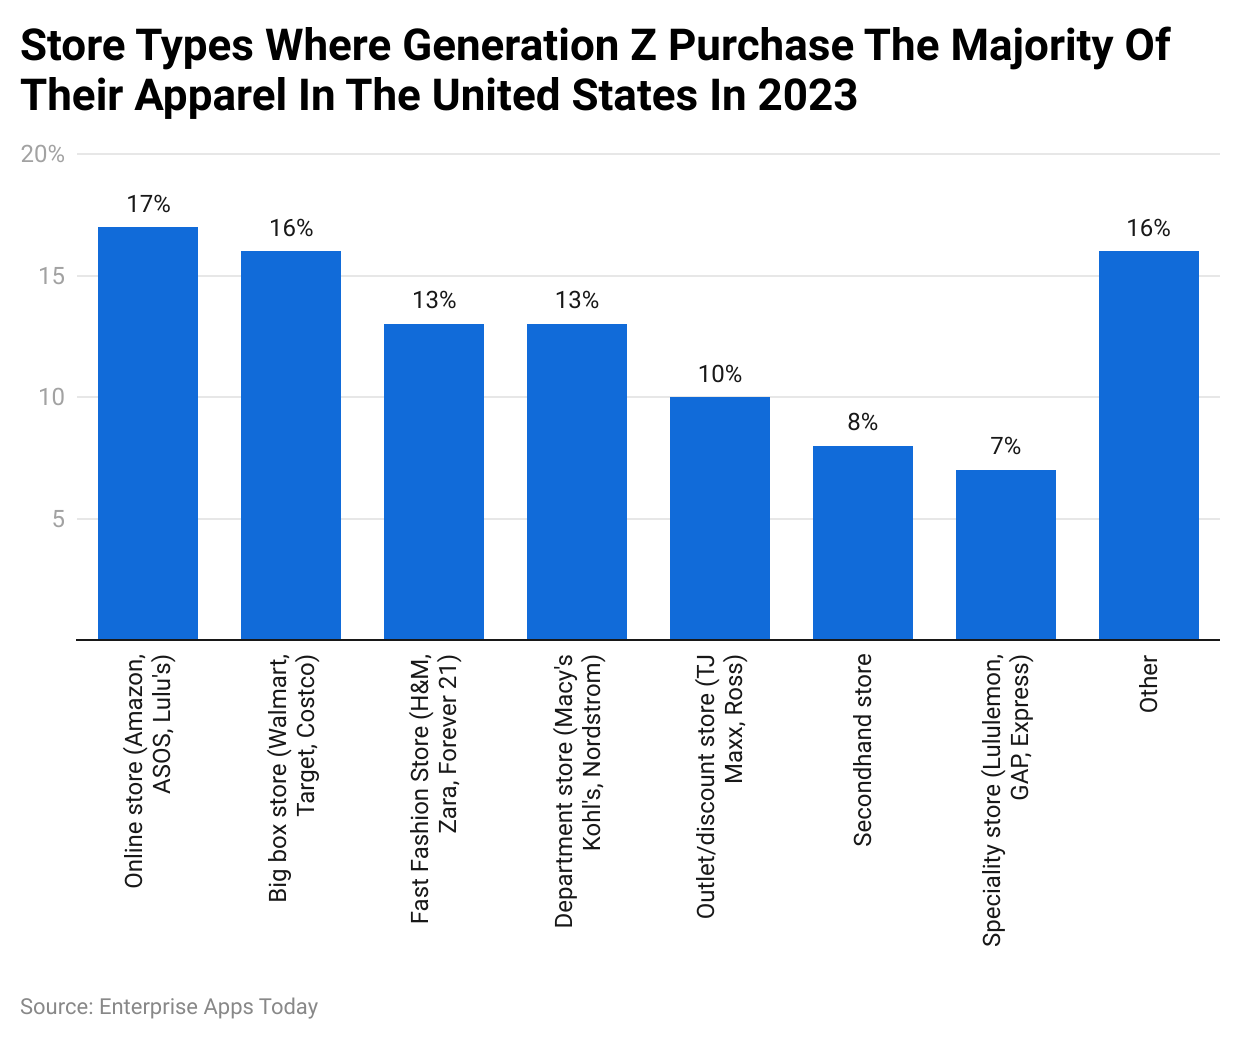 Store types where Generation Z purchase the majority of their apparel in the United States in 2023